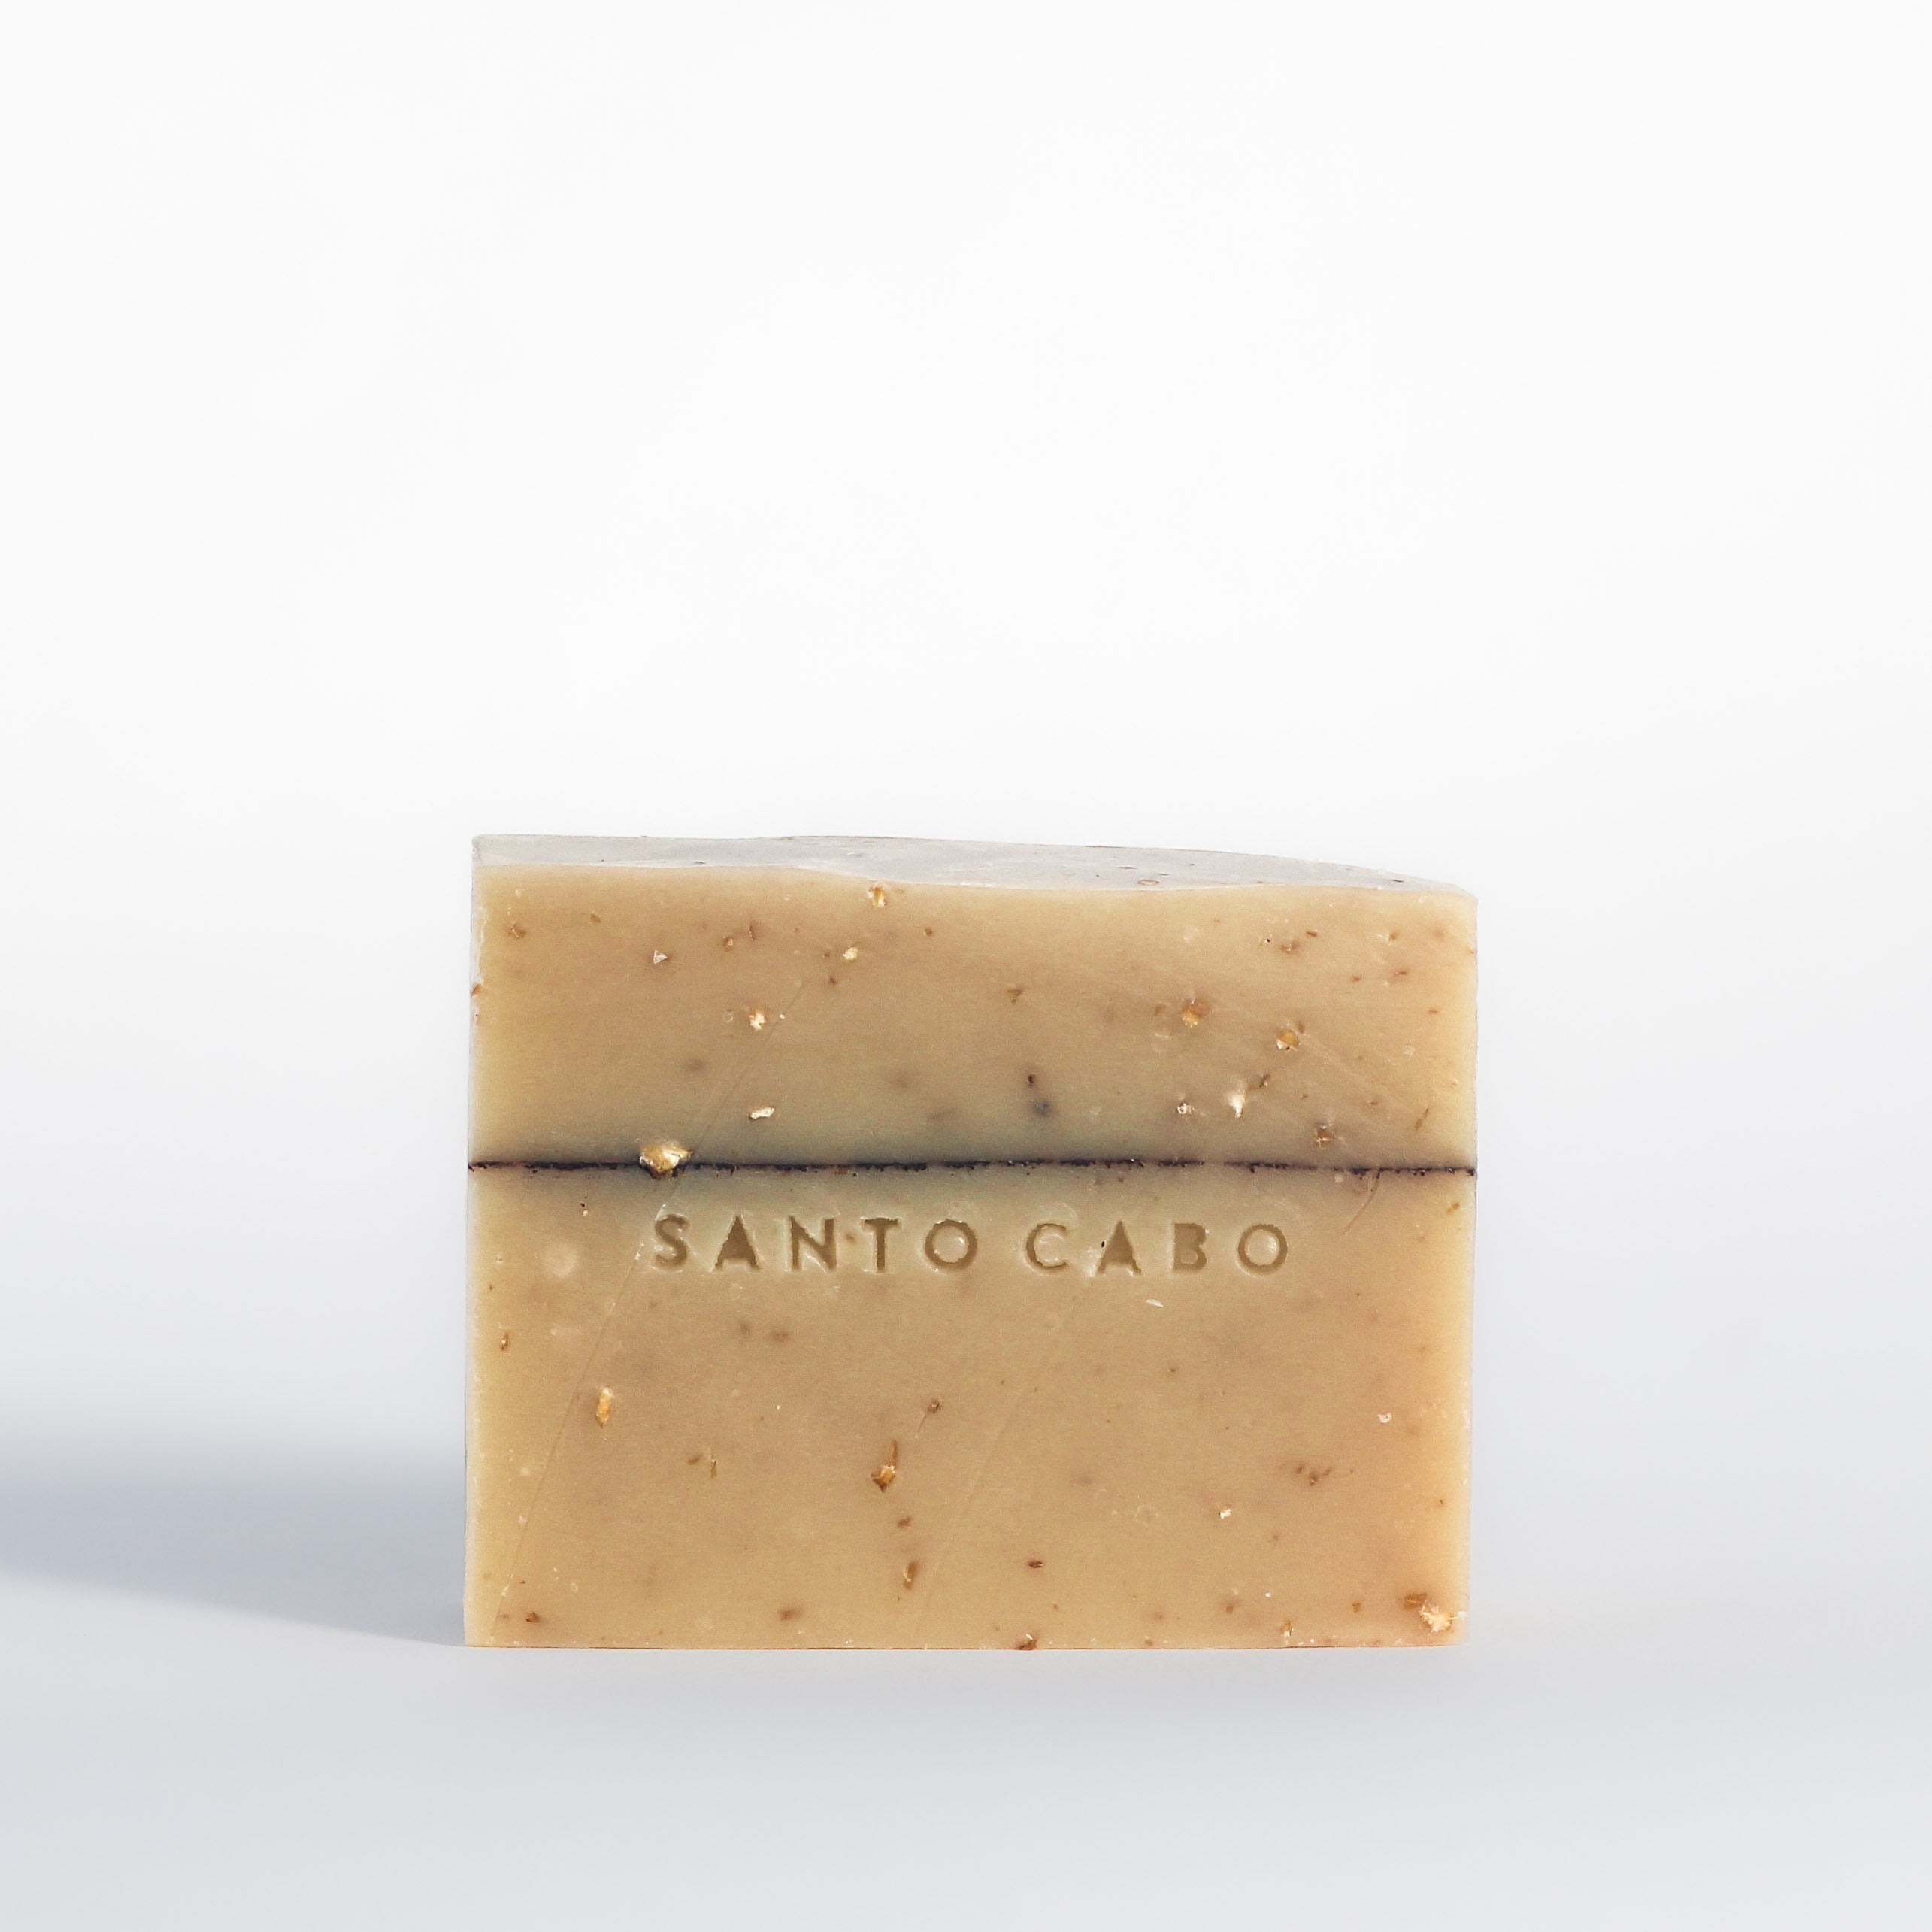 Single bar of handmade Cinnamon Oat Soap bar with cinnamon detail line, flecks of hand ground oats and stamped with Santo Cabo logo.